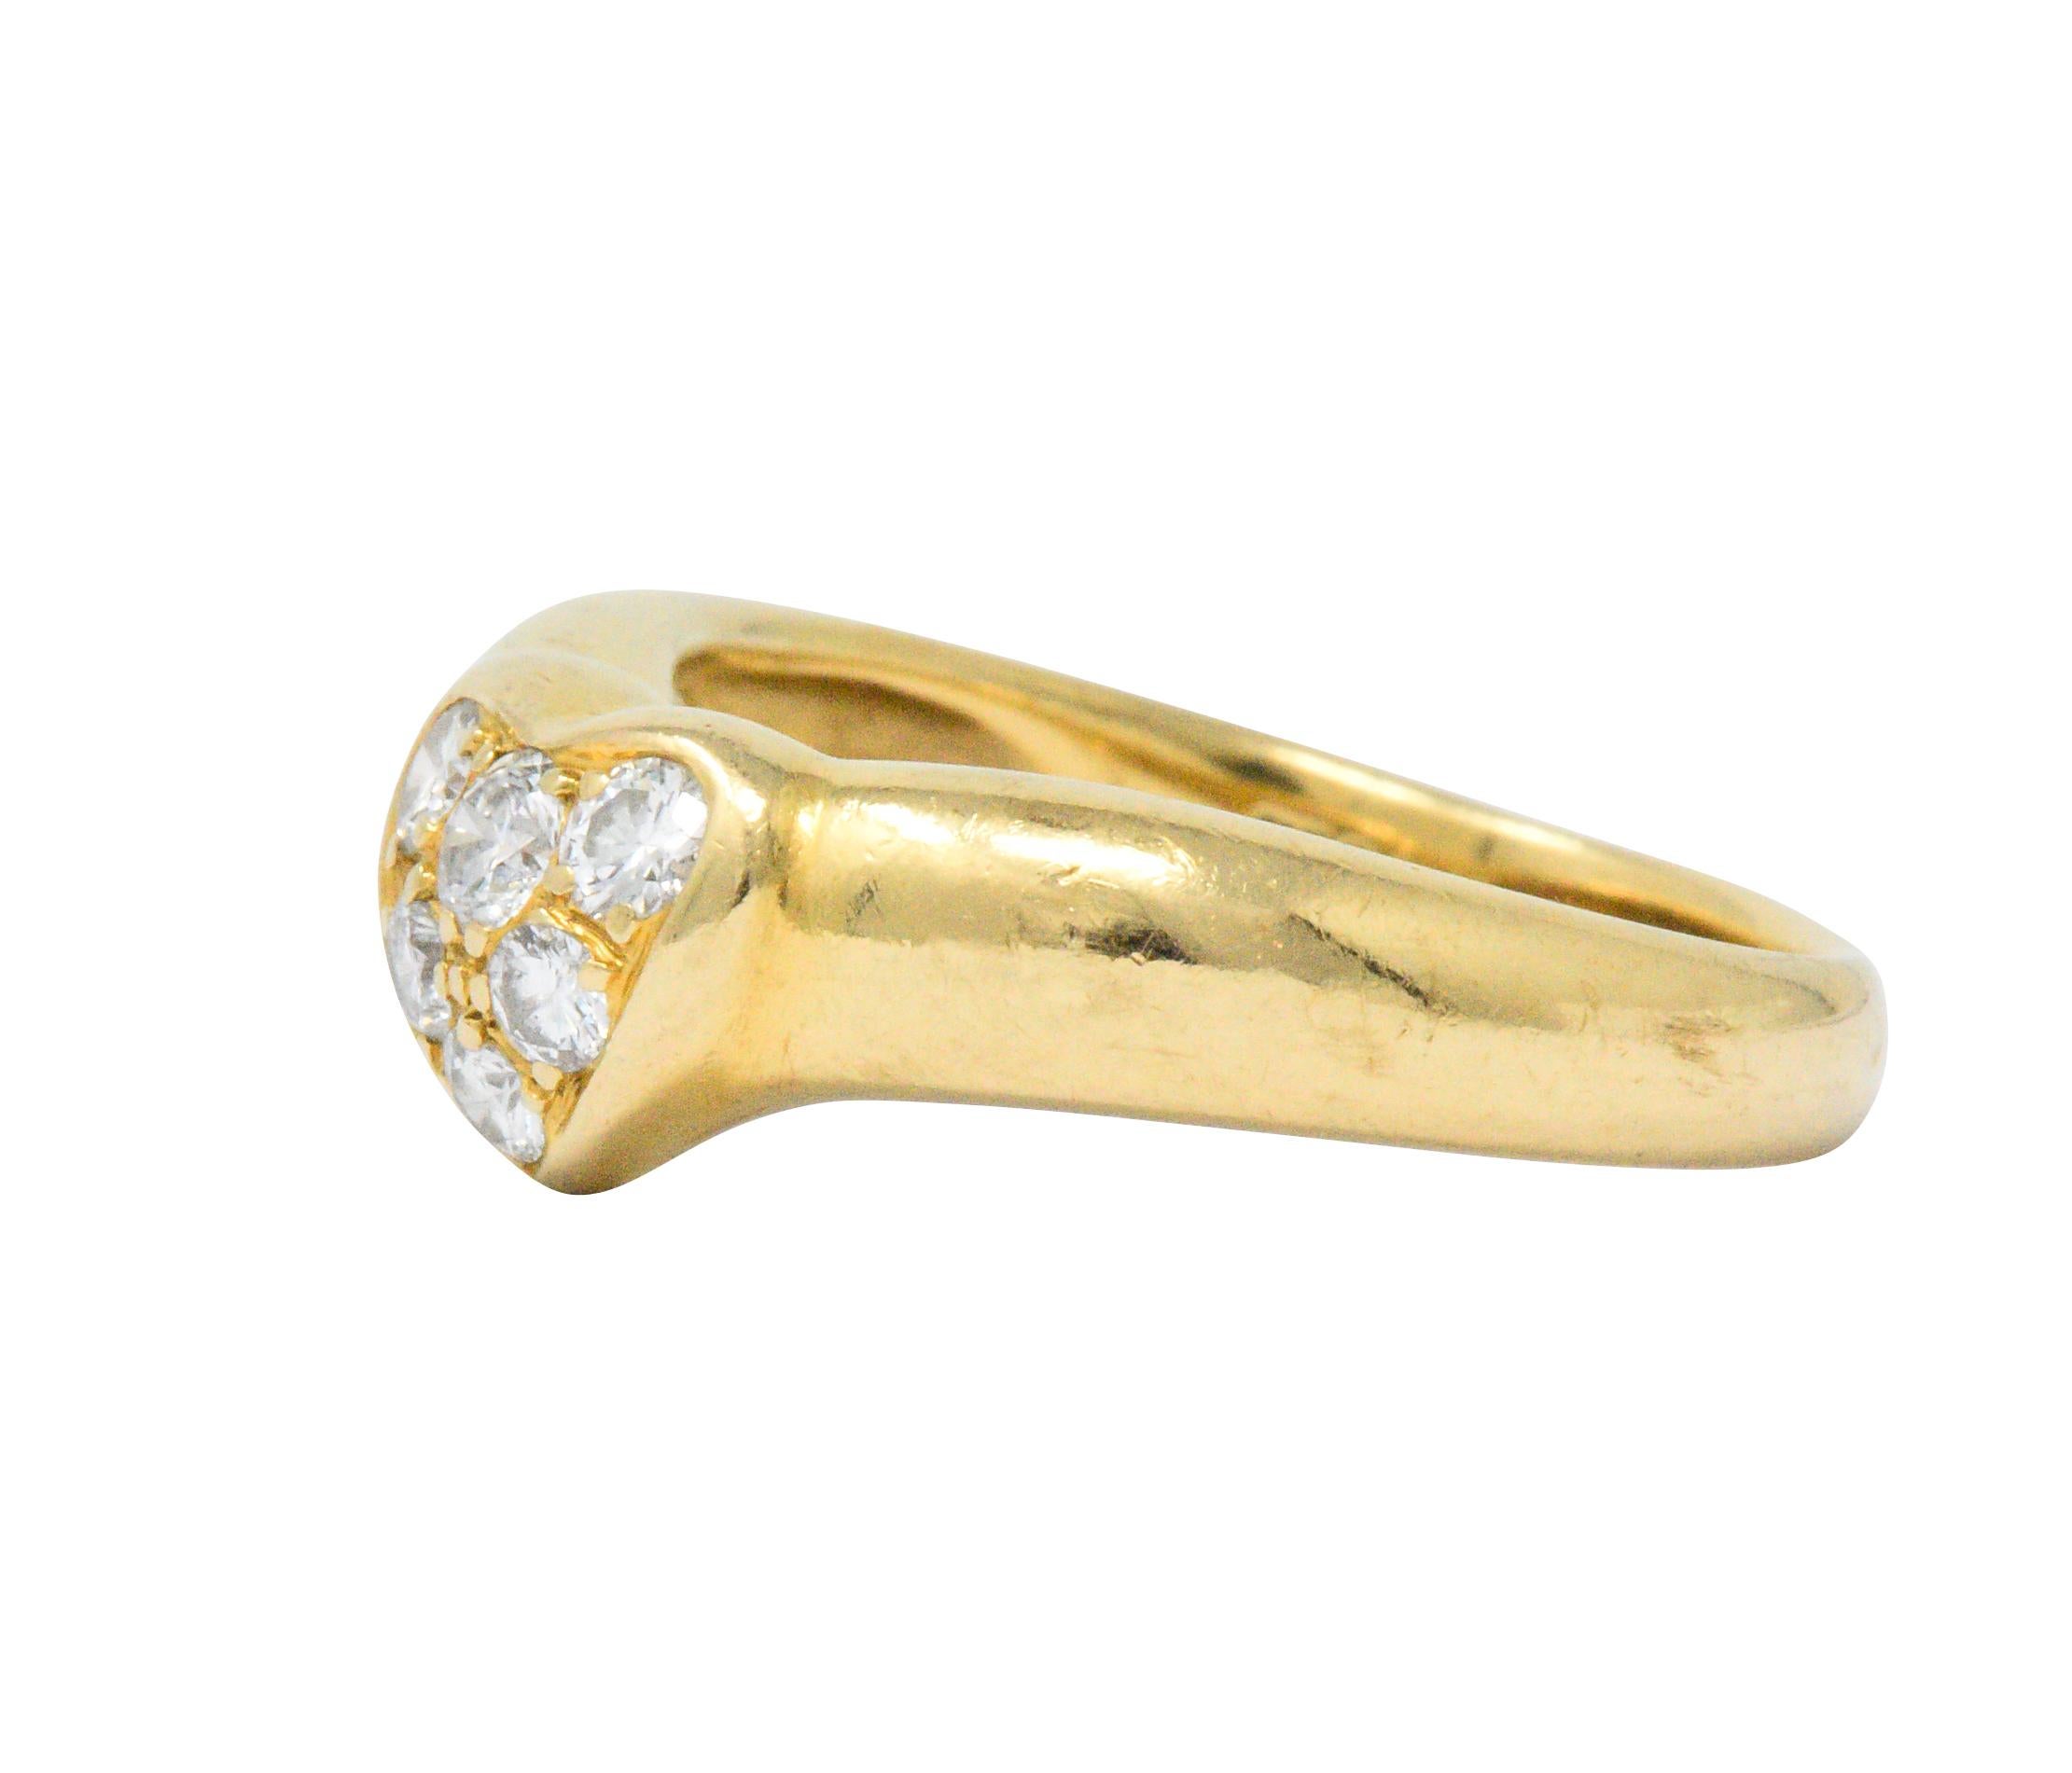 Centering a heart, with six bead set round brilliant cut diamonds, weighing approximately 0.25 carats total, G/H color and VS clarity

The heart blends effortlessly into the wide polished gold shank

Sweet fun ring

Fully signed Tiffany & Co. 

Ring